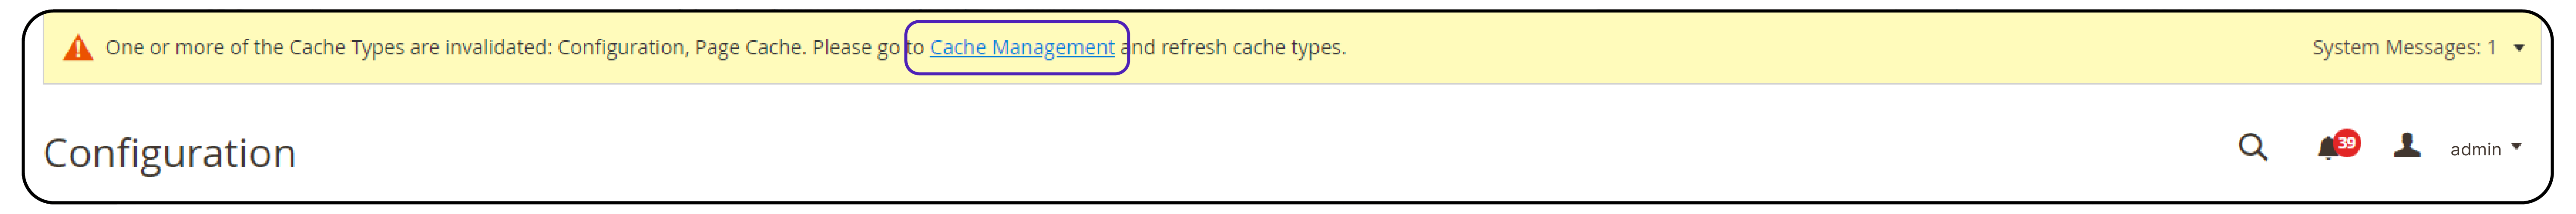 Refreshing cache as final step in Magento 2 Single Store Mode activation